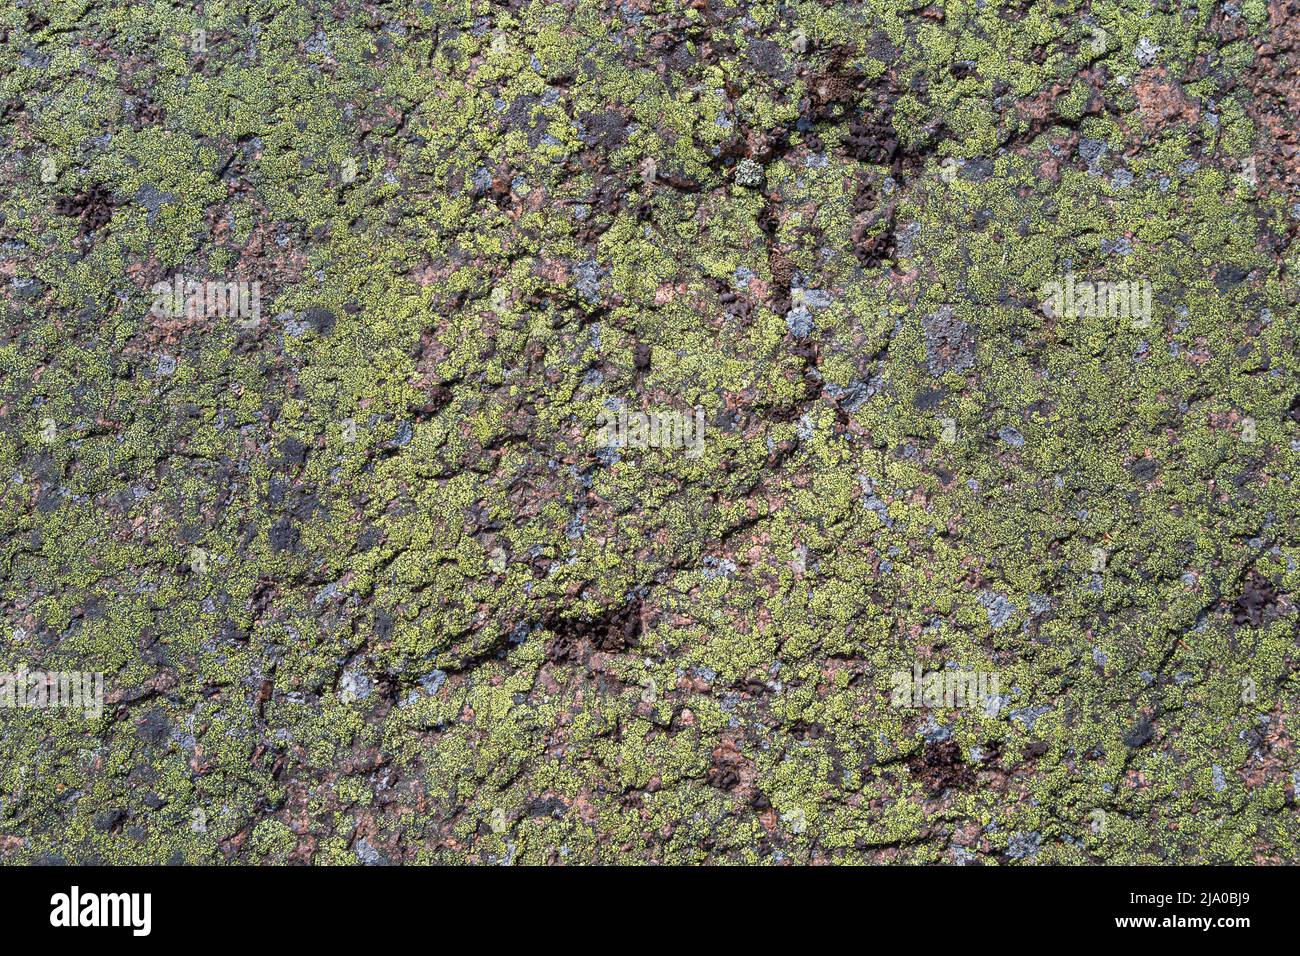 Close-up of green Map lichen (Rhizocarpon geographicum) on a red granite rock. Abstract high resolution full frame textured natural background. Stock Photo